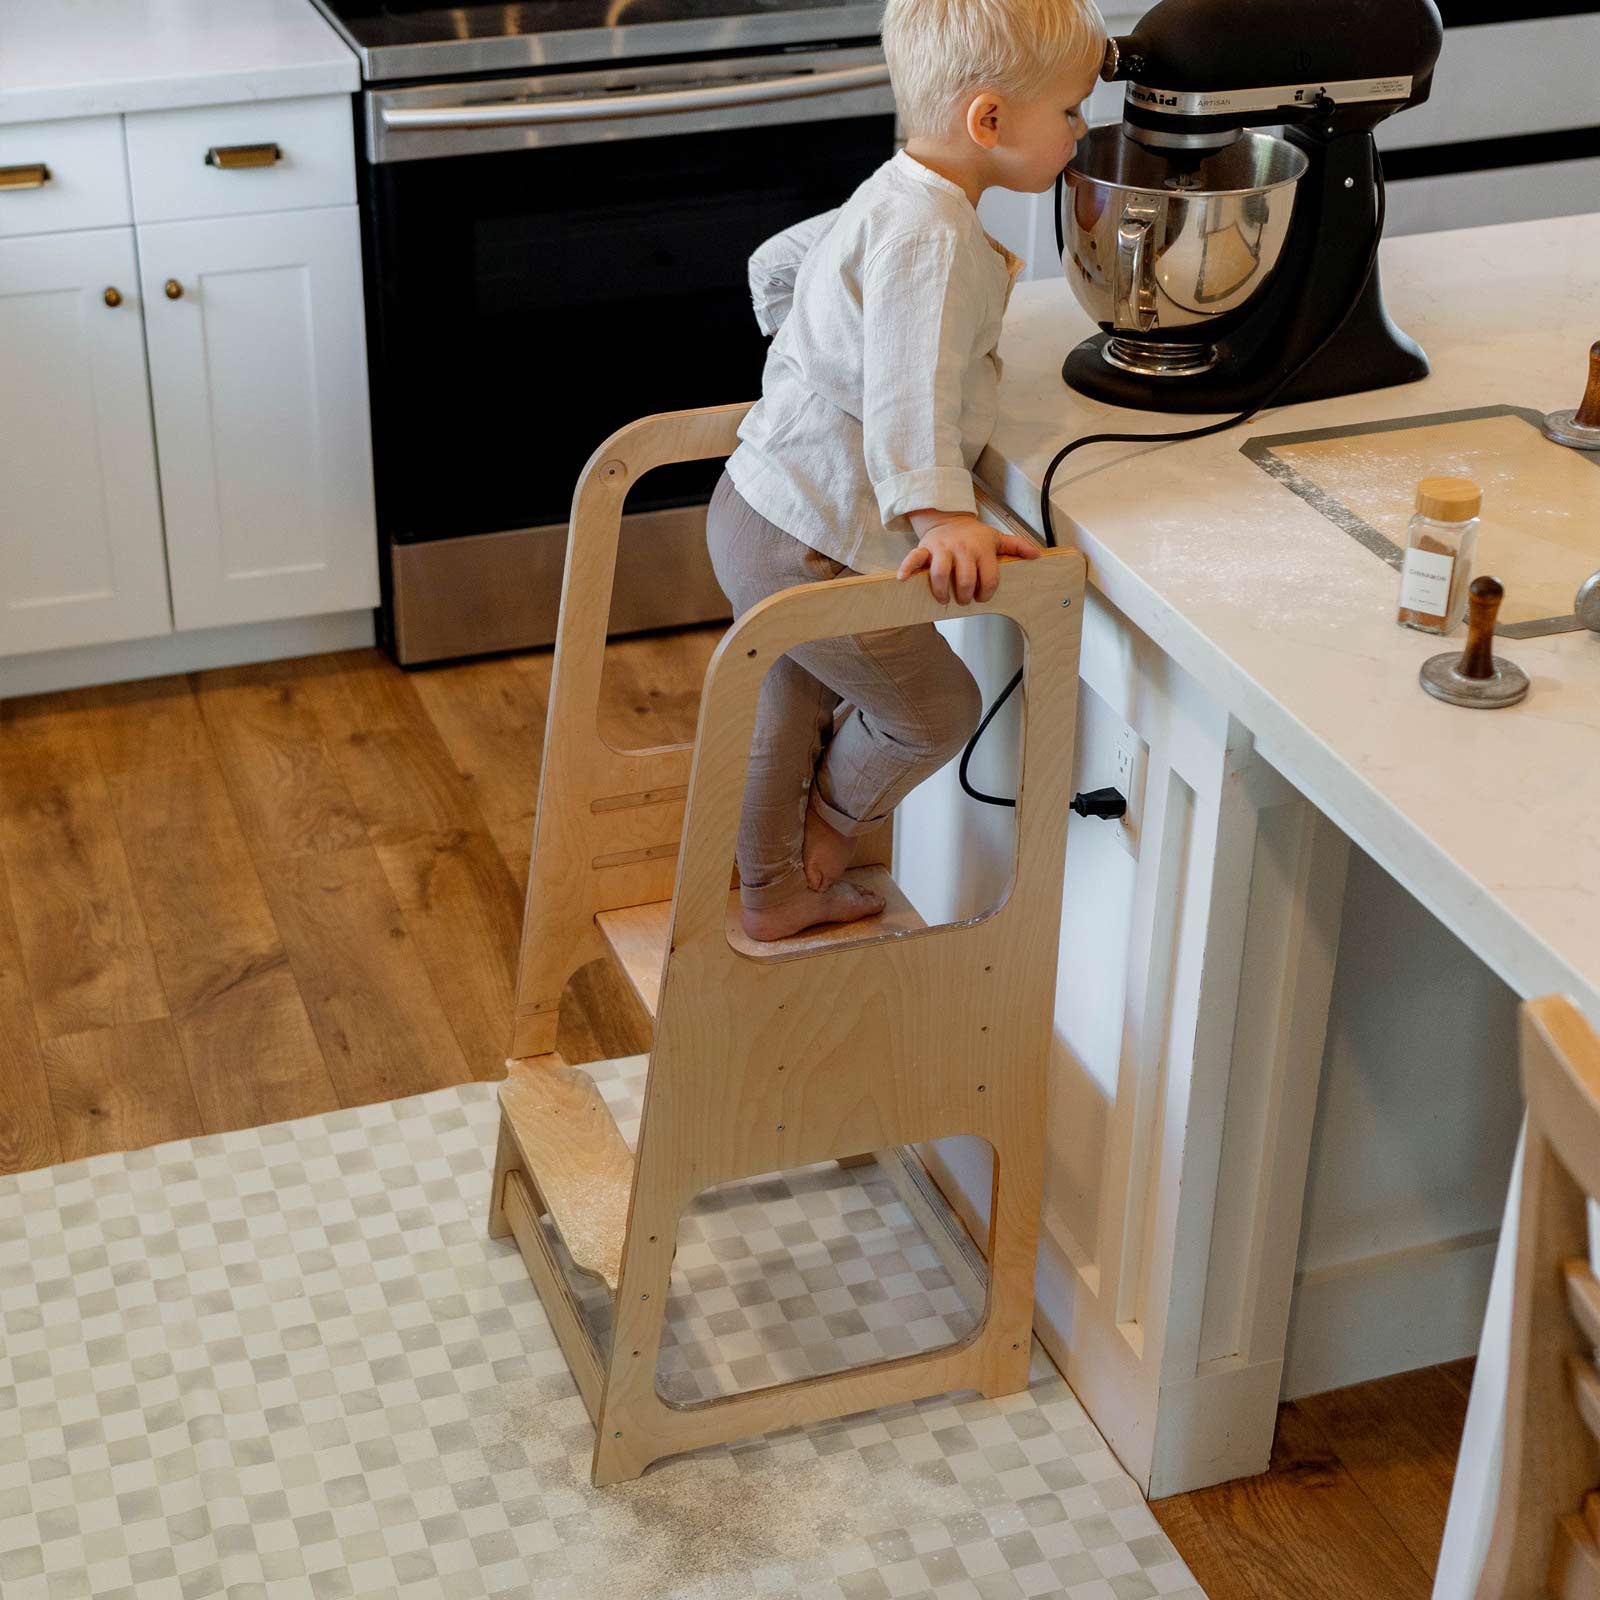 Checker almond tonal beige geometric print high chair mat shown with toddler standing on a stool making cookies at the kitchen counter